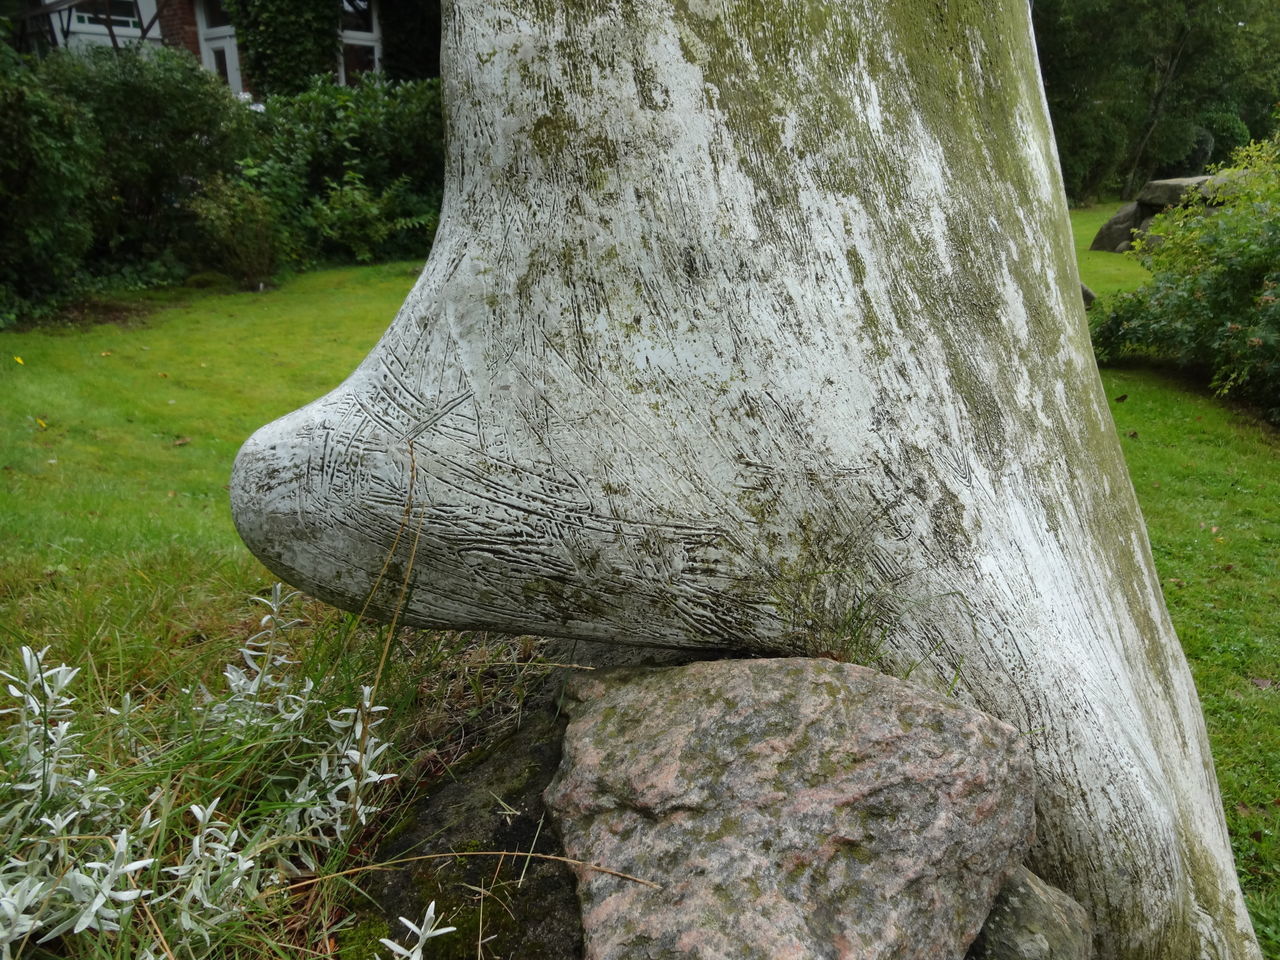 CLOSE-UP OF TREE TRUNK WITH MOSS ON GRASS